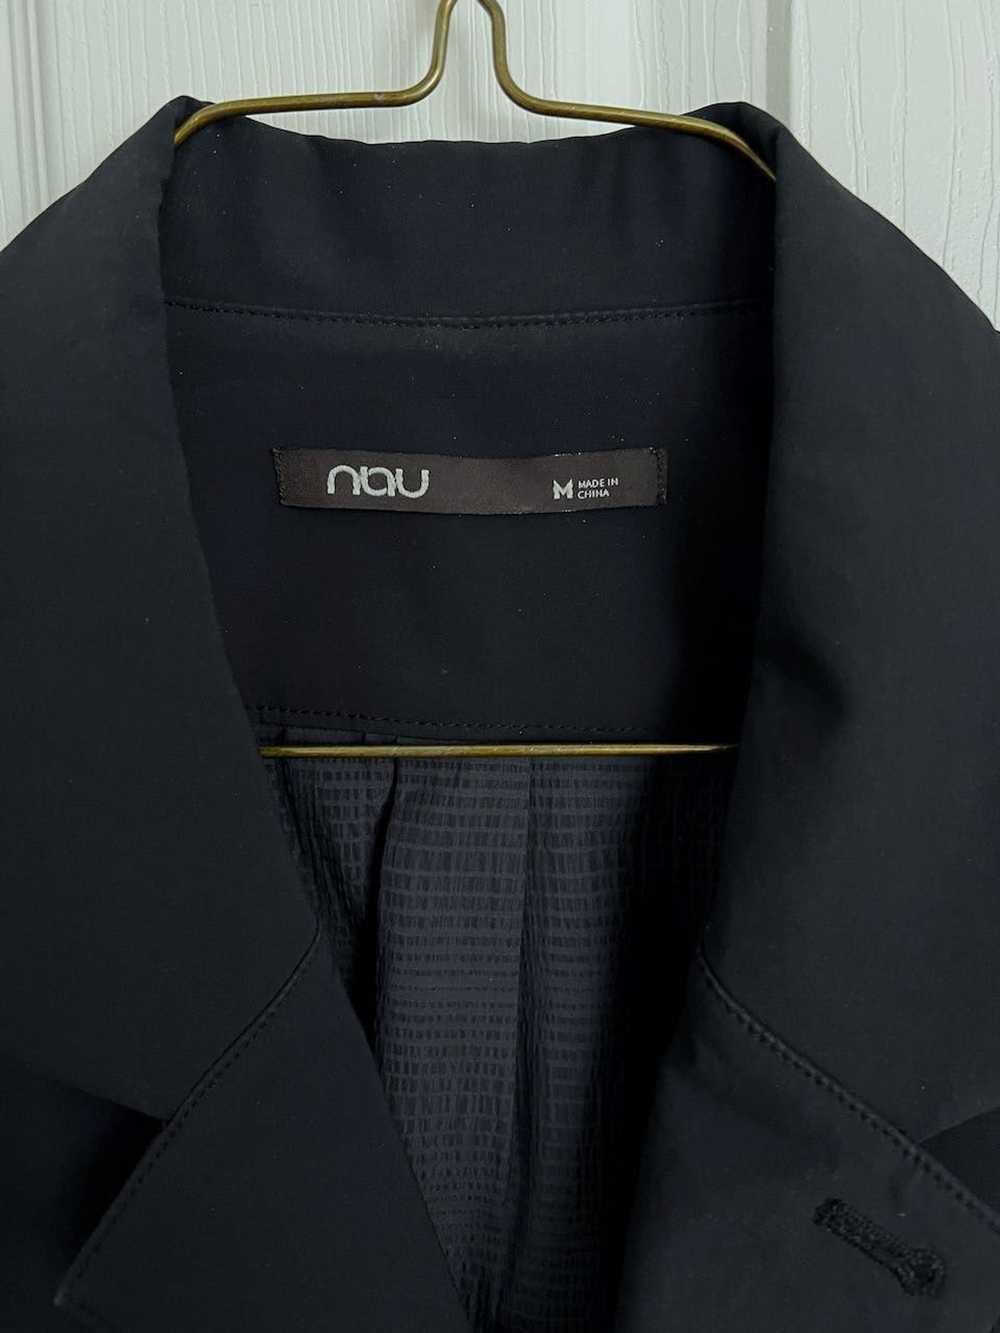 Nau Stretch Recycled Polyester Commuter Jacket - image 2